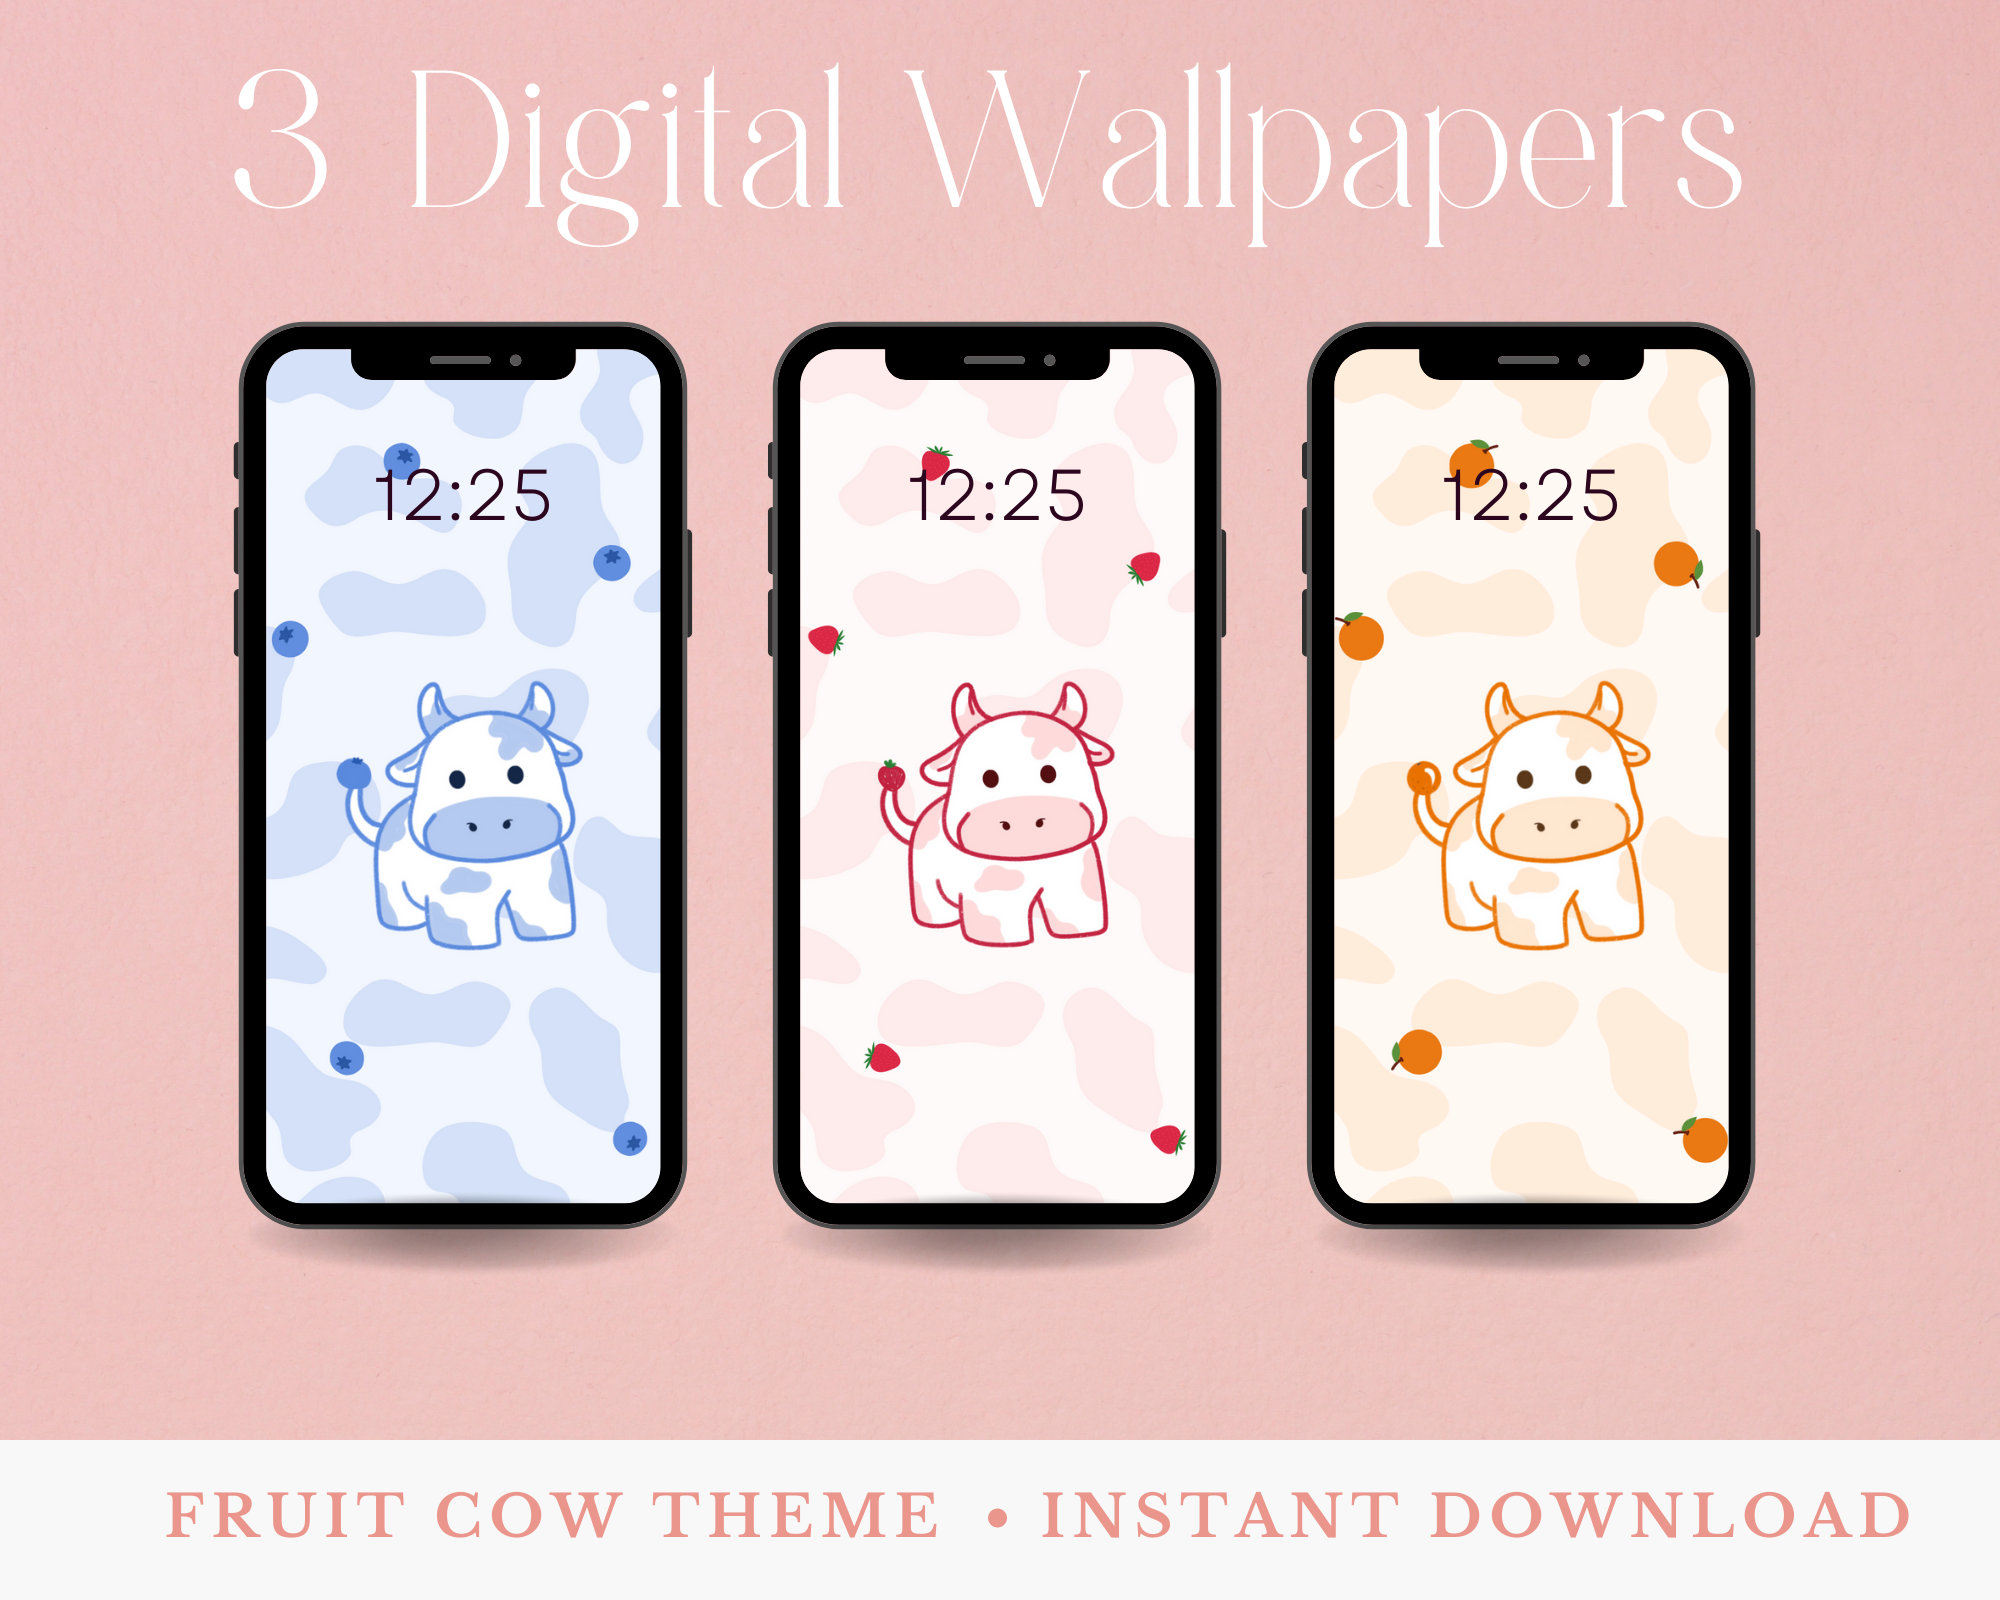 Strawberry cow   Video  Cow drawing Cow wallpaper Cartoon wallpaper  iphone